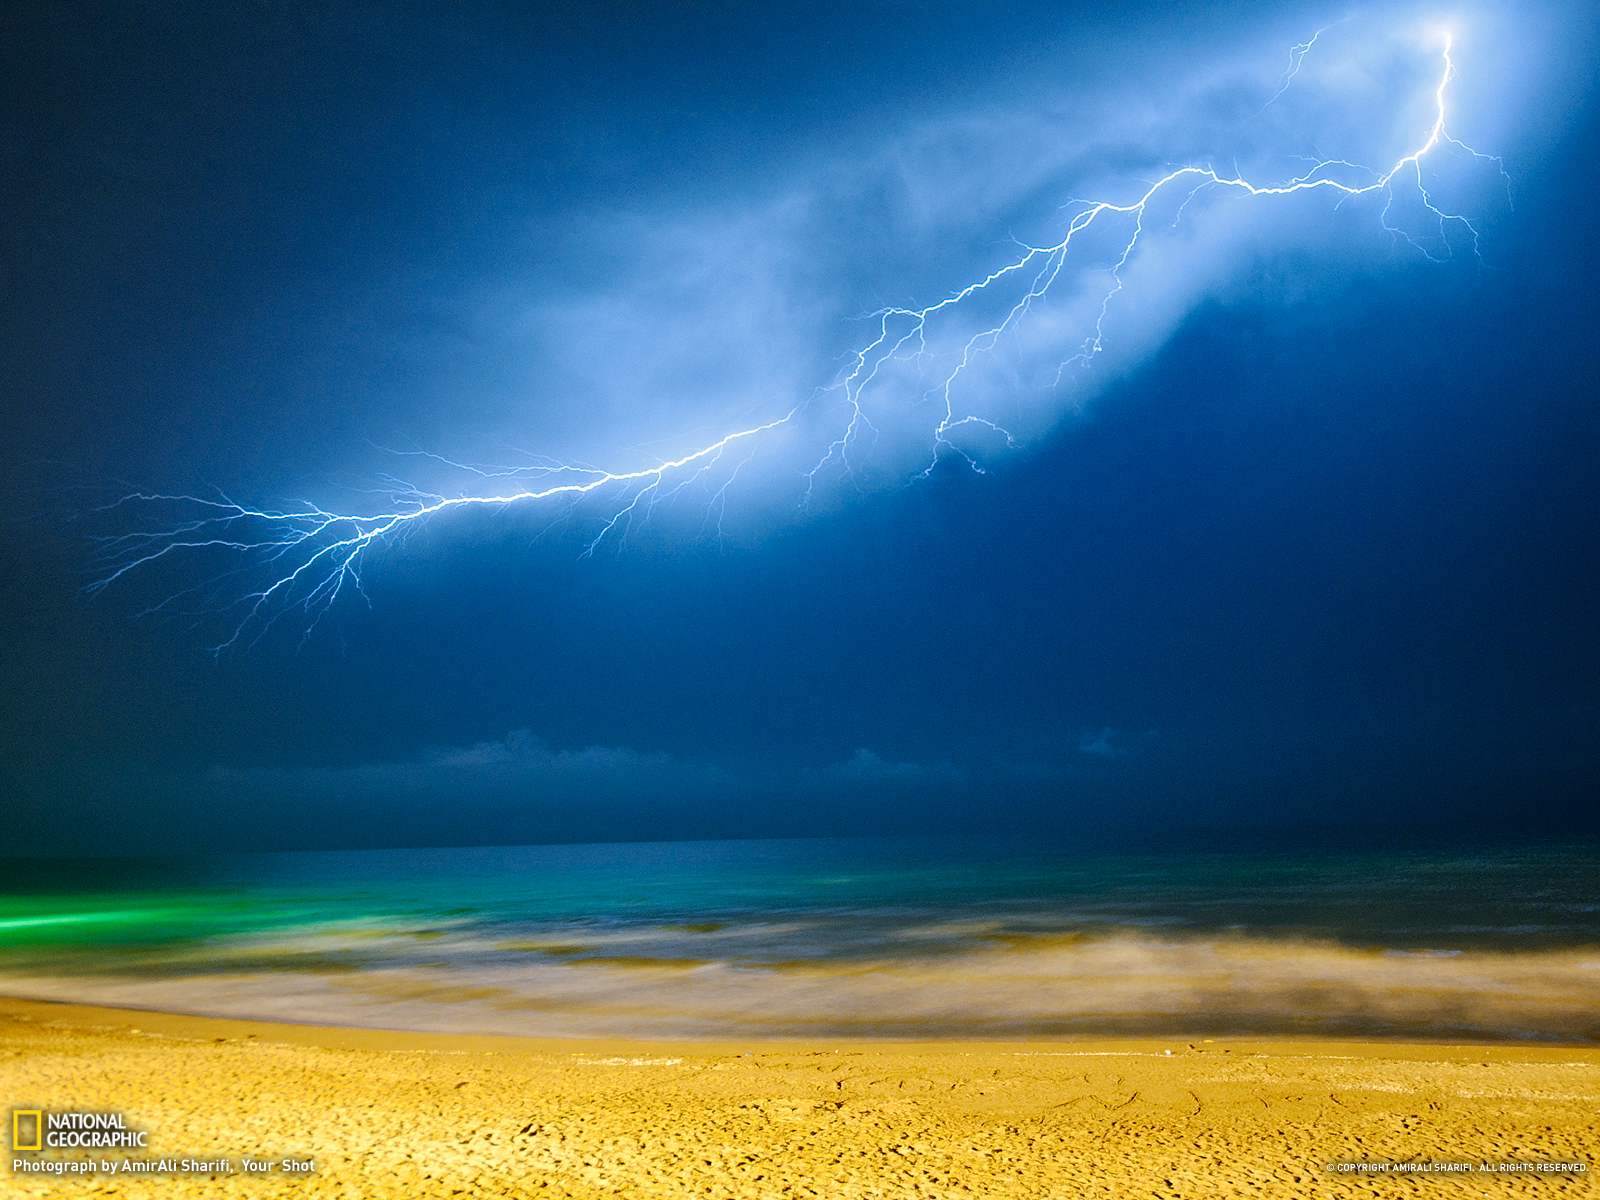 Lightning Picture Weather Wallpaper National Geographic Photo Of